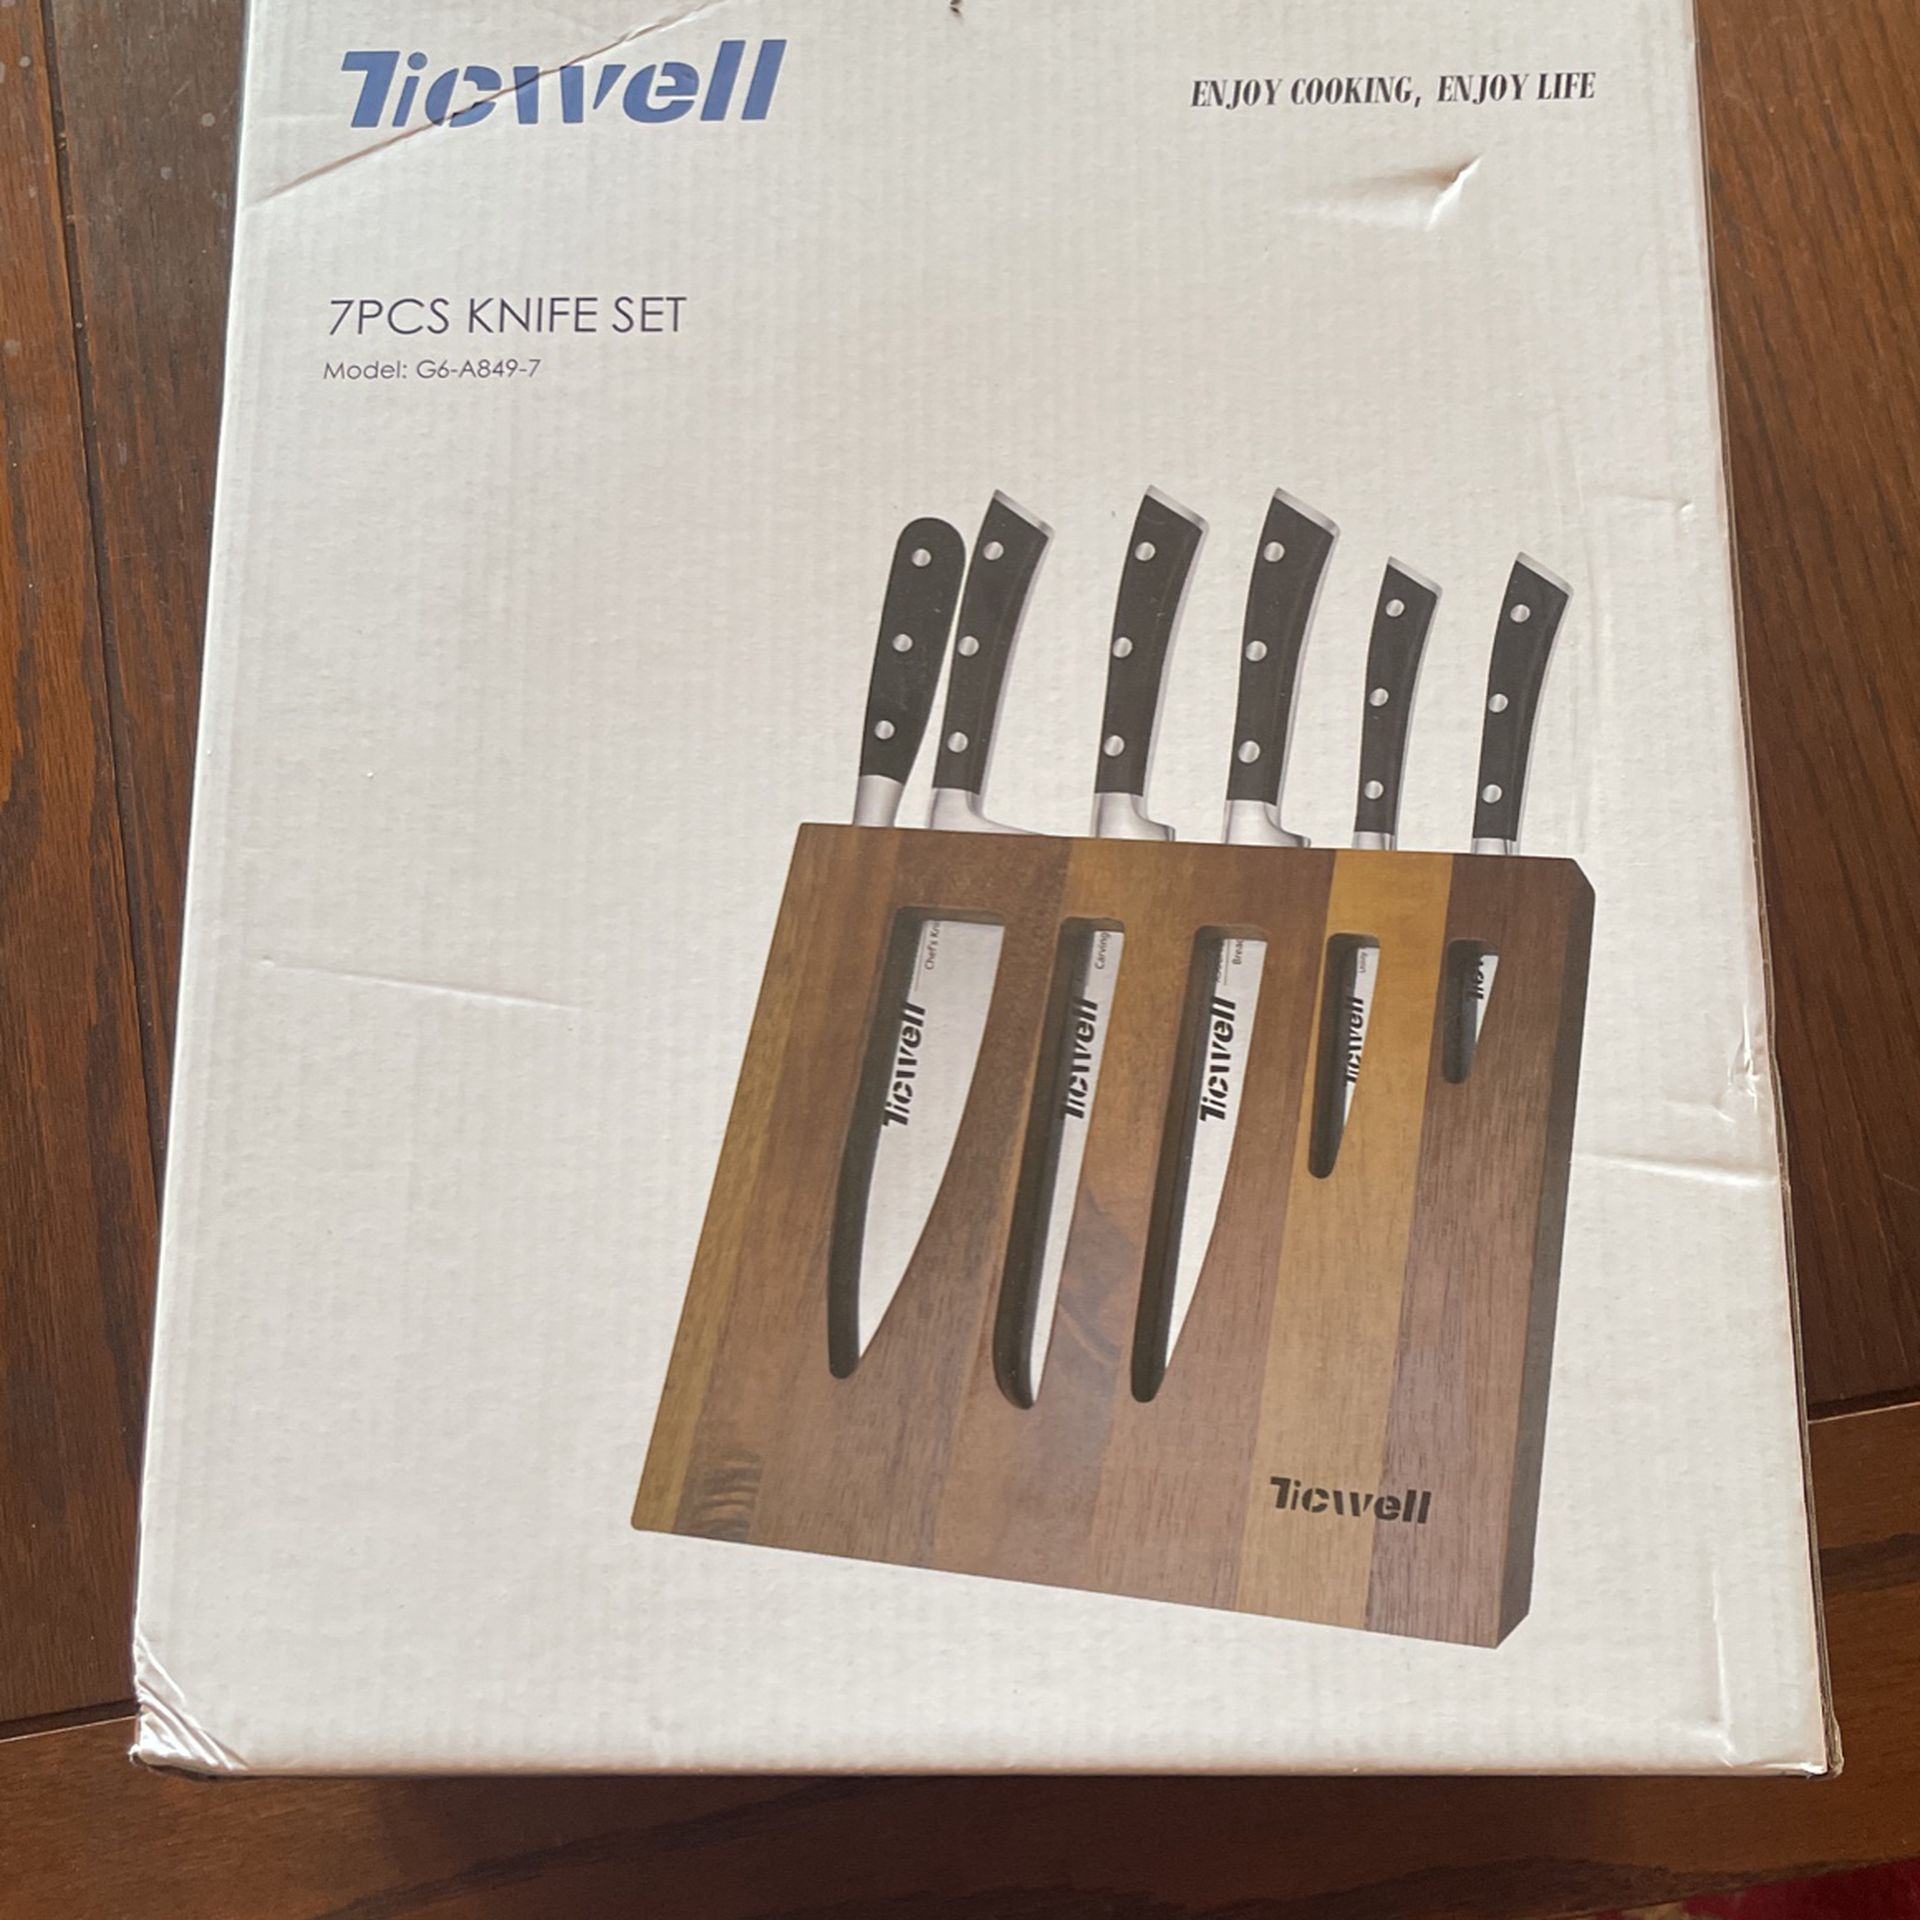 Knife Sets for sale in Stickney, Illinois